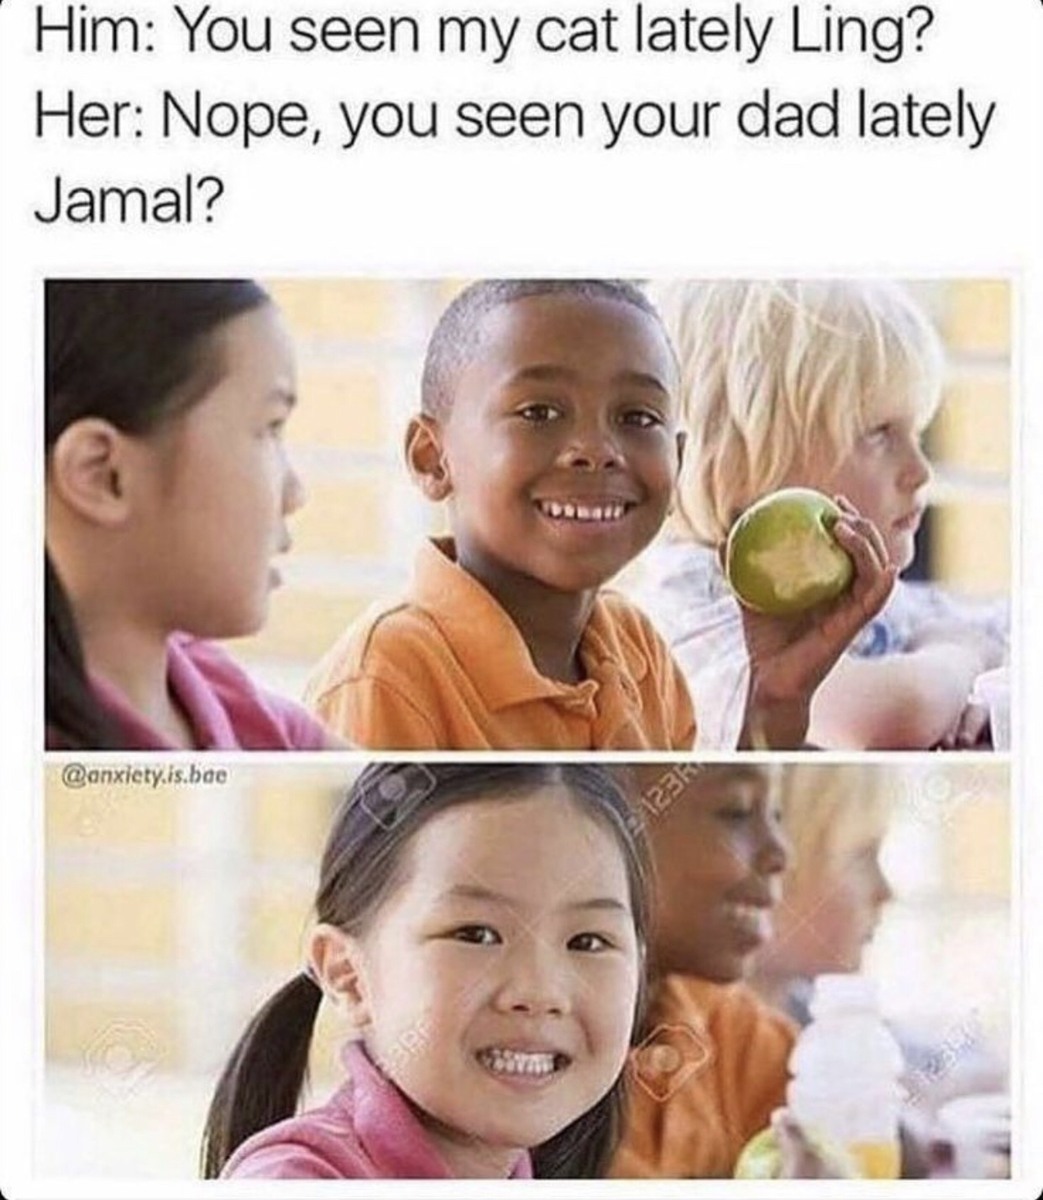 she ate his cat cuz shes asian and he dont got no dad cuz hes black - meme